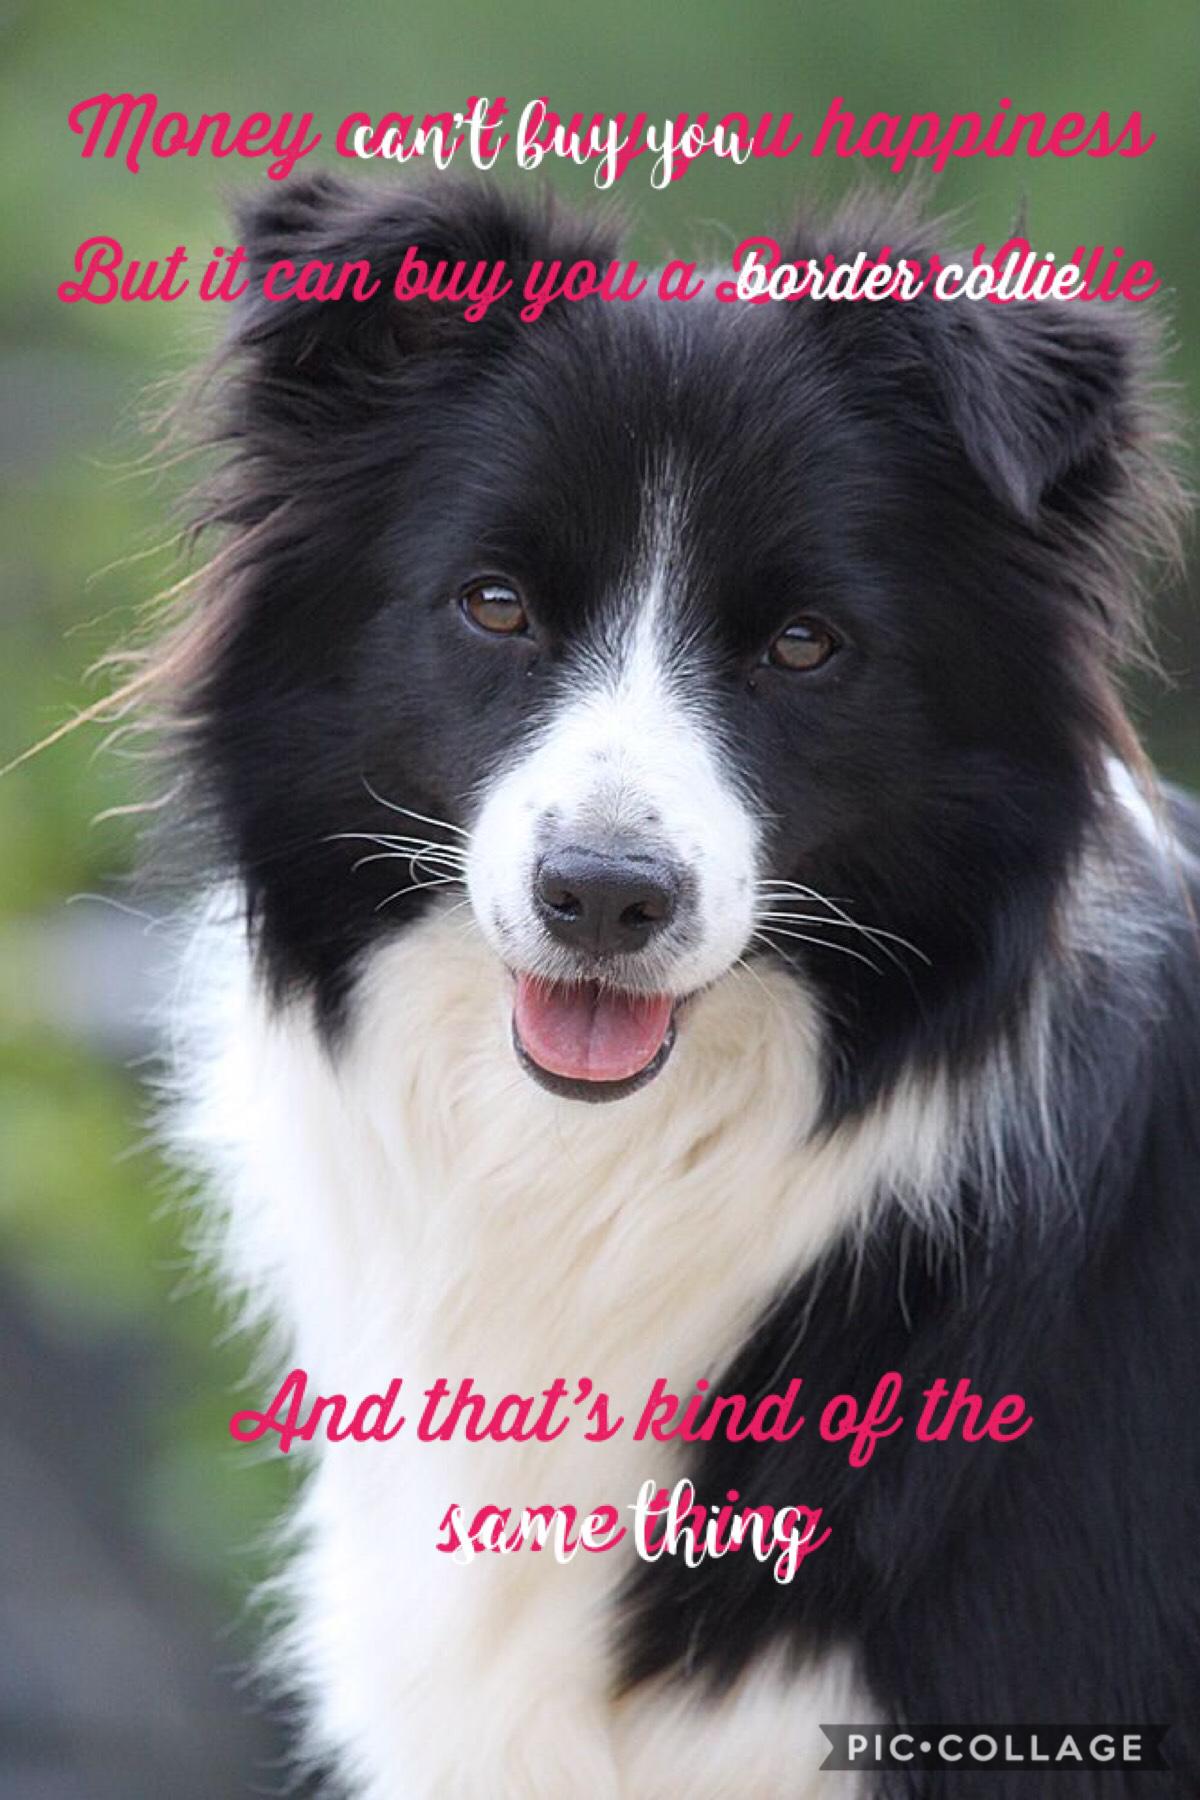 Money can’t buy you happiness, but can buy you a Border Collie, and that’s kind of the same thing. ❤️❤️❤️